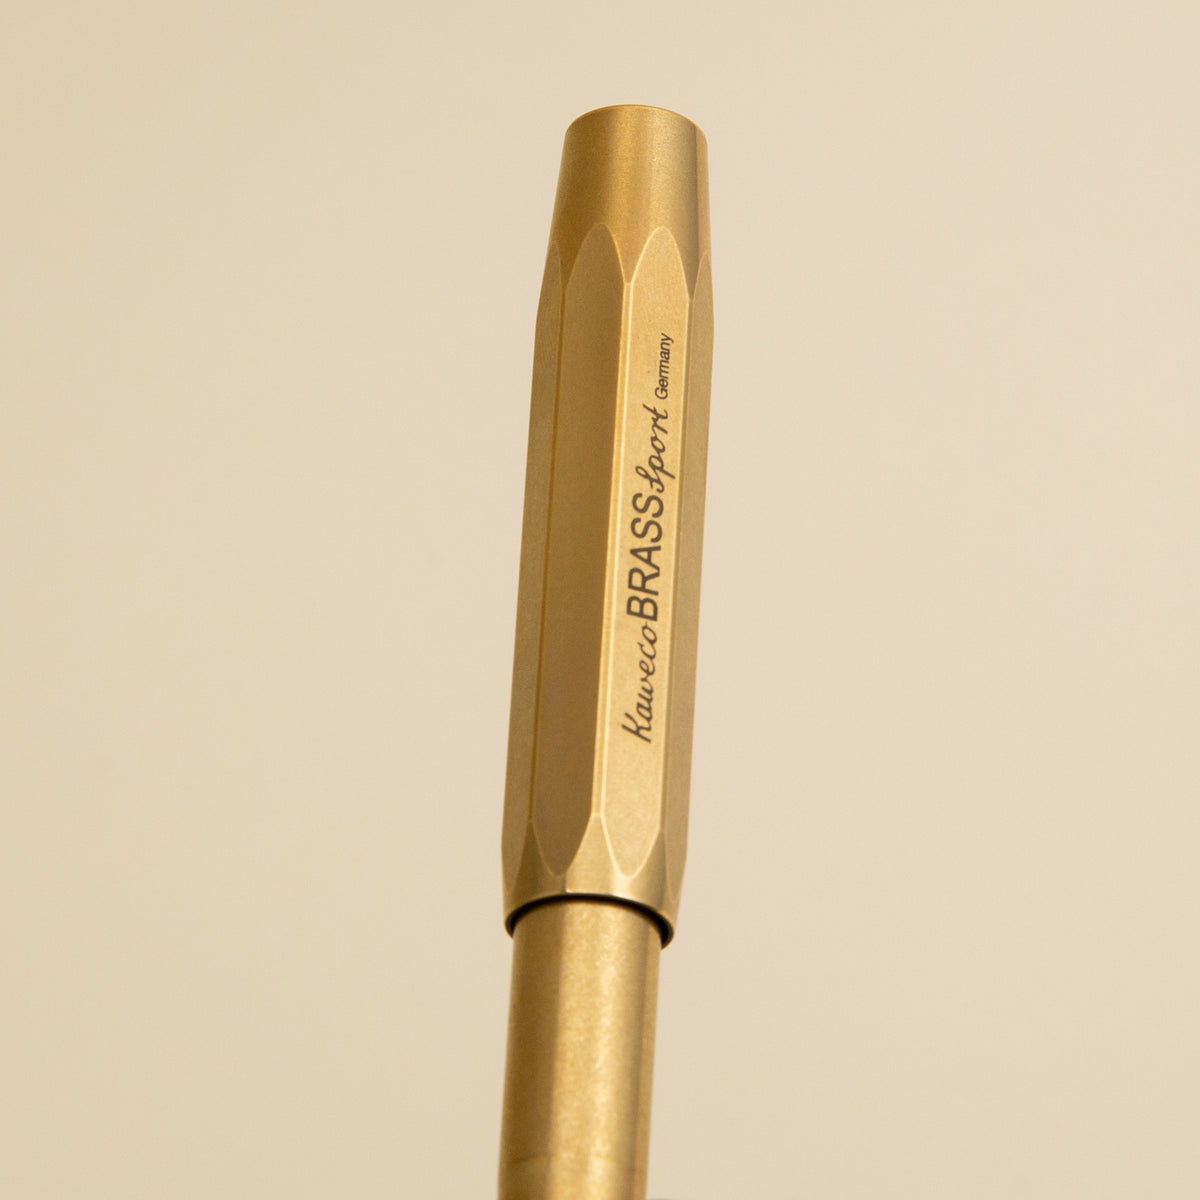 Kaweco Brass Sport Fountain Pen — Libraries and Archives Paper Company